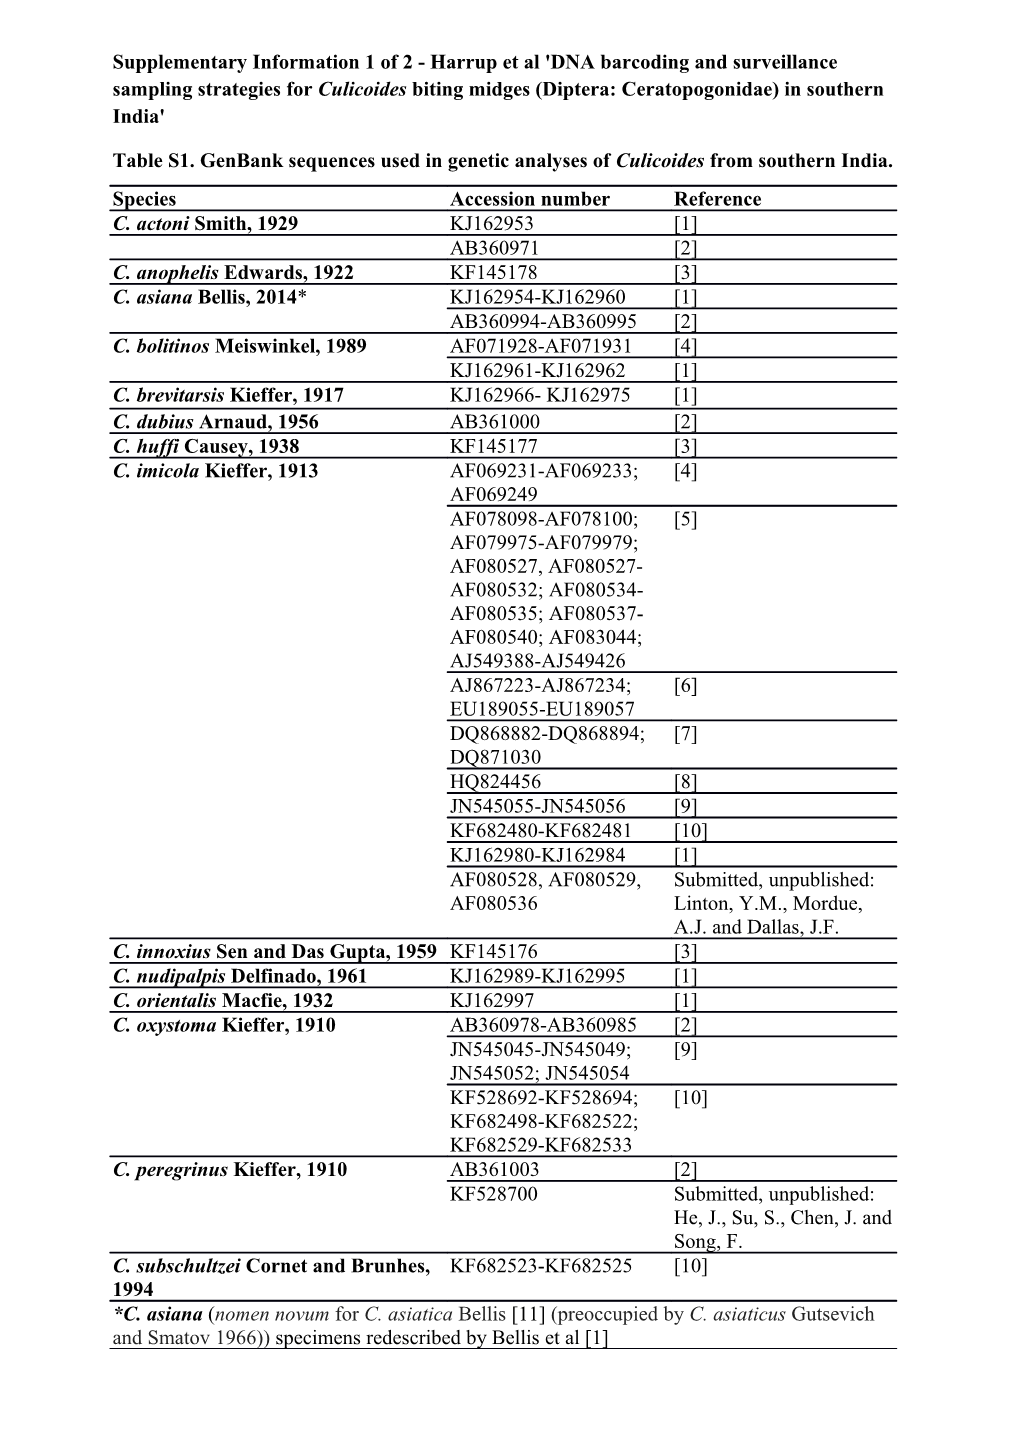 Table S1. Genbank Sequences Used in Genetic Analyses of Culicoides from Southern India